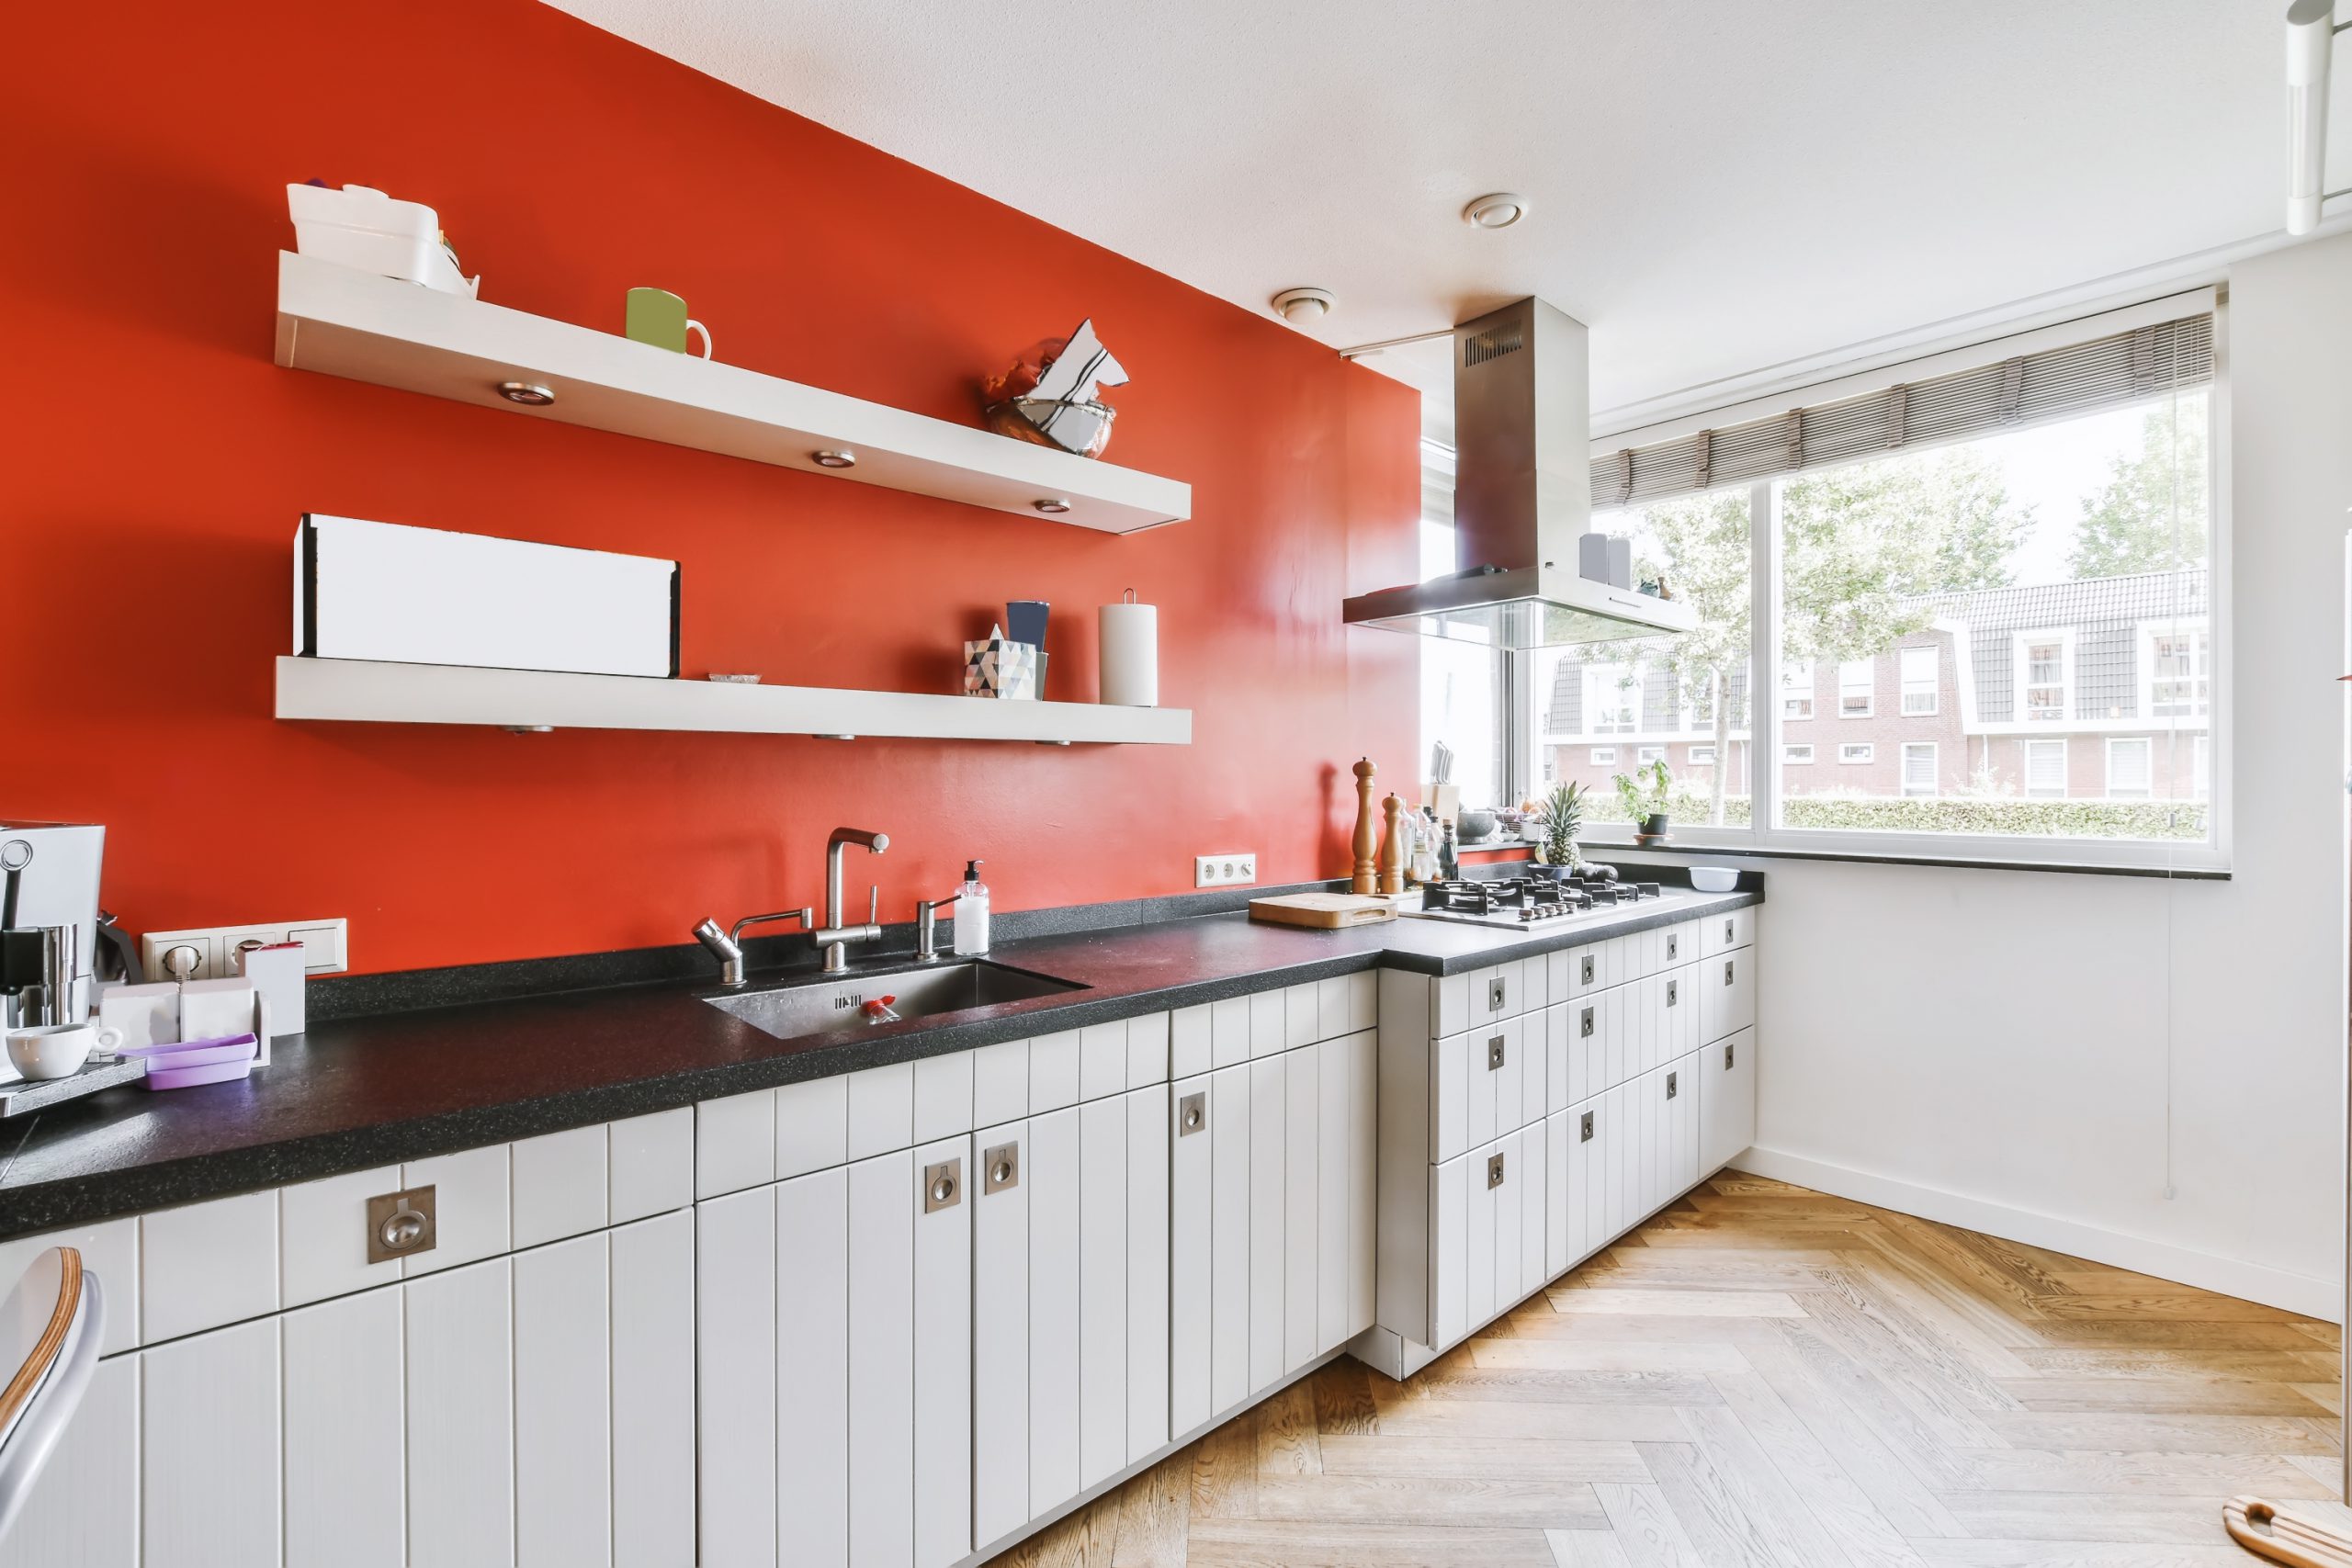 A Delightful Kitchen With A Red Wall And A White Kitchen Set